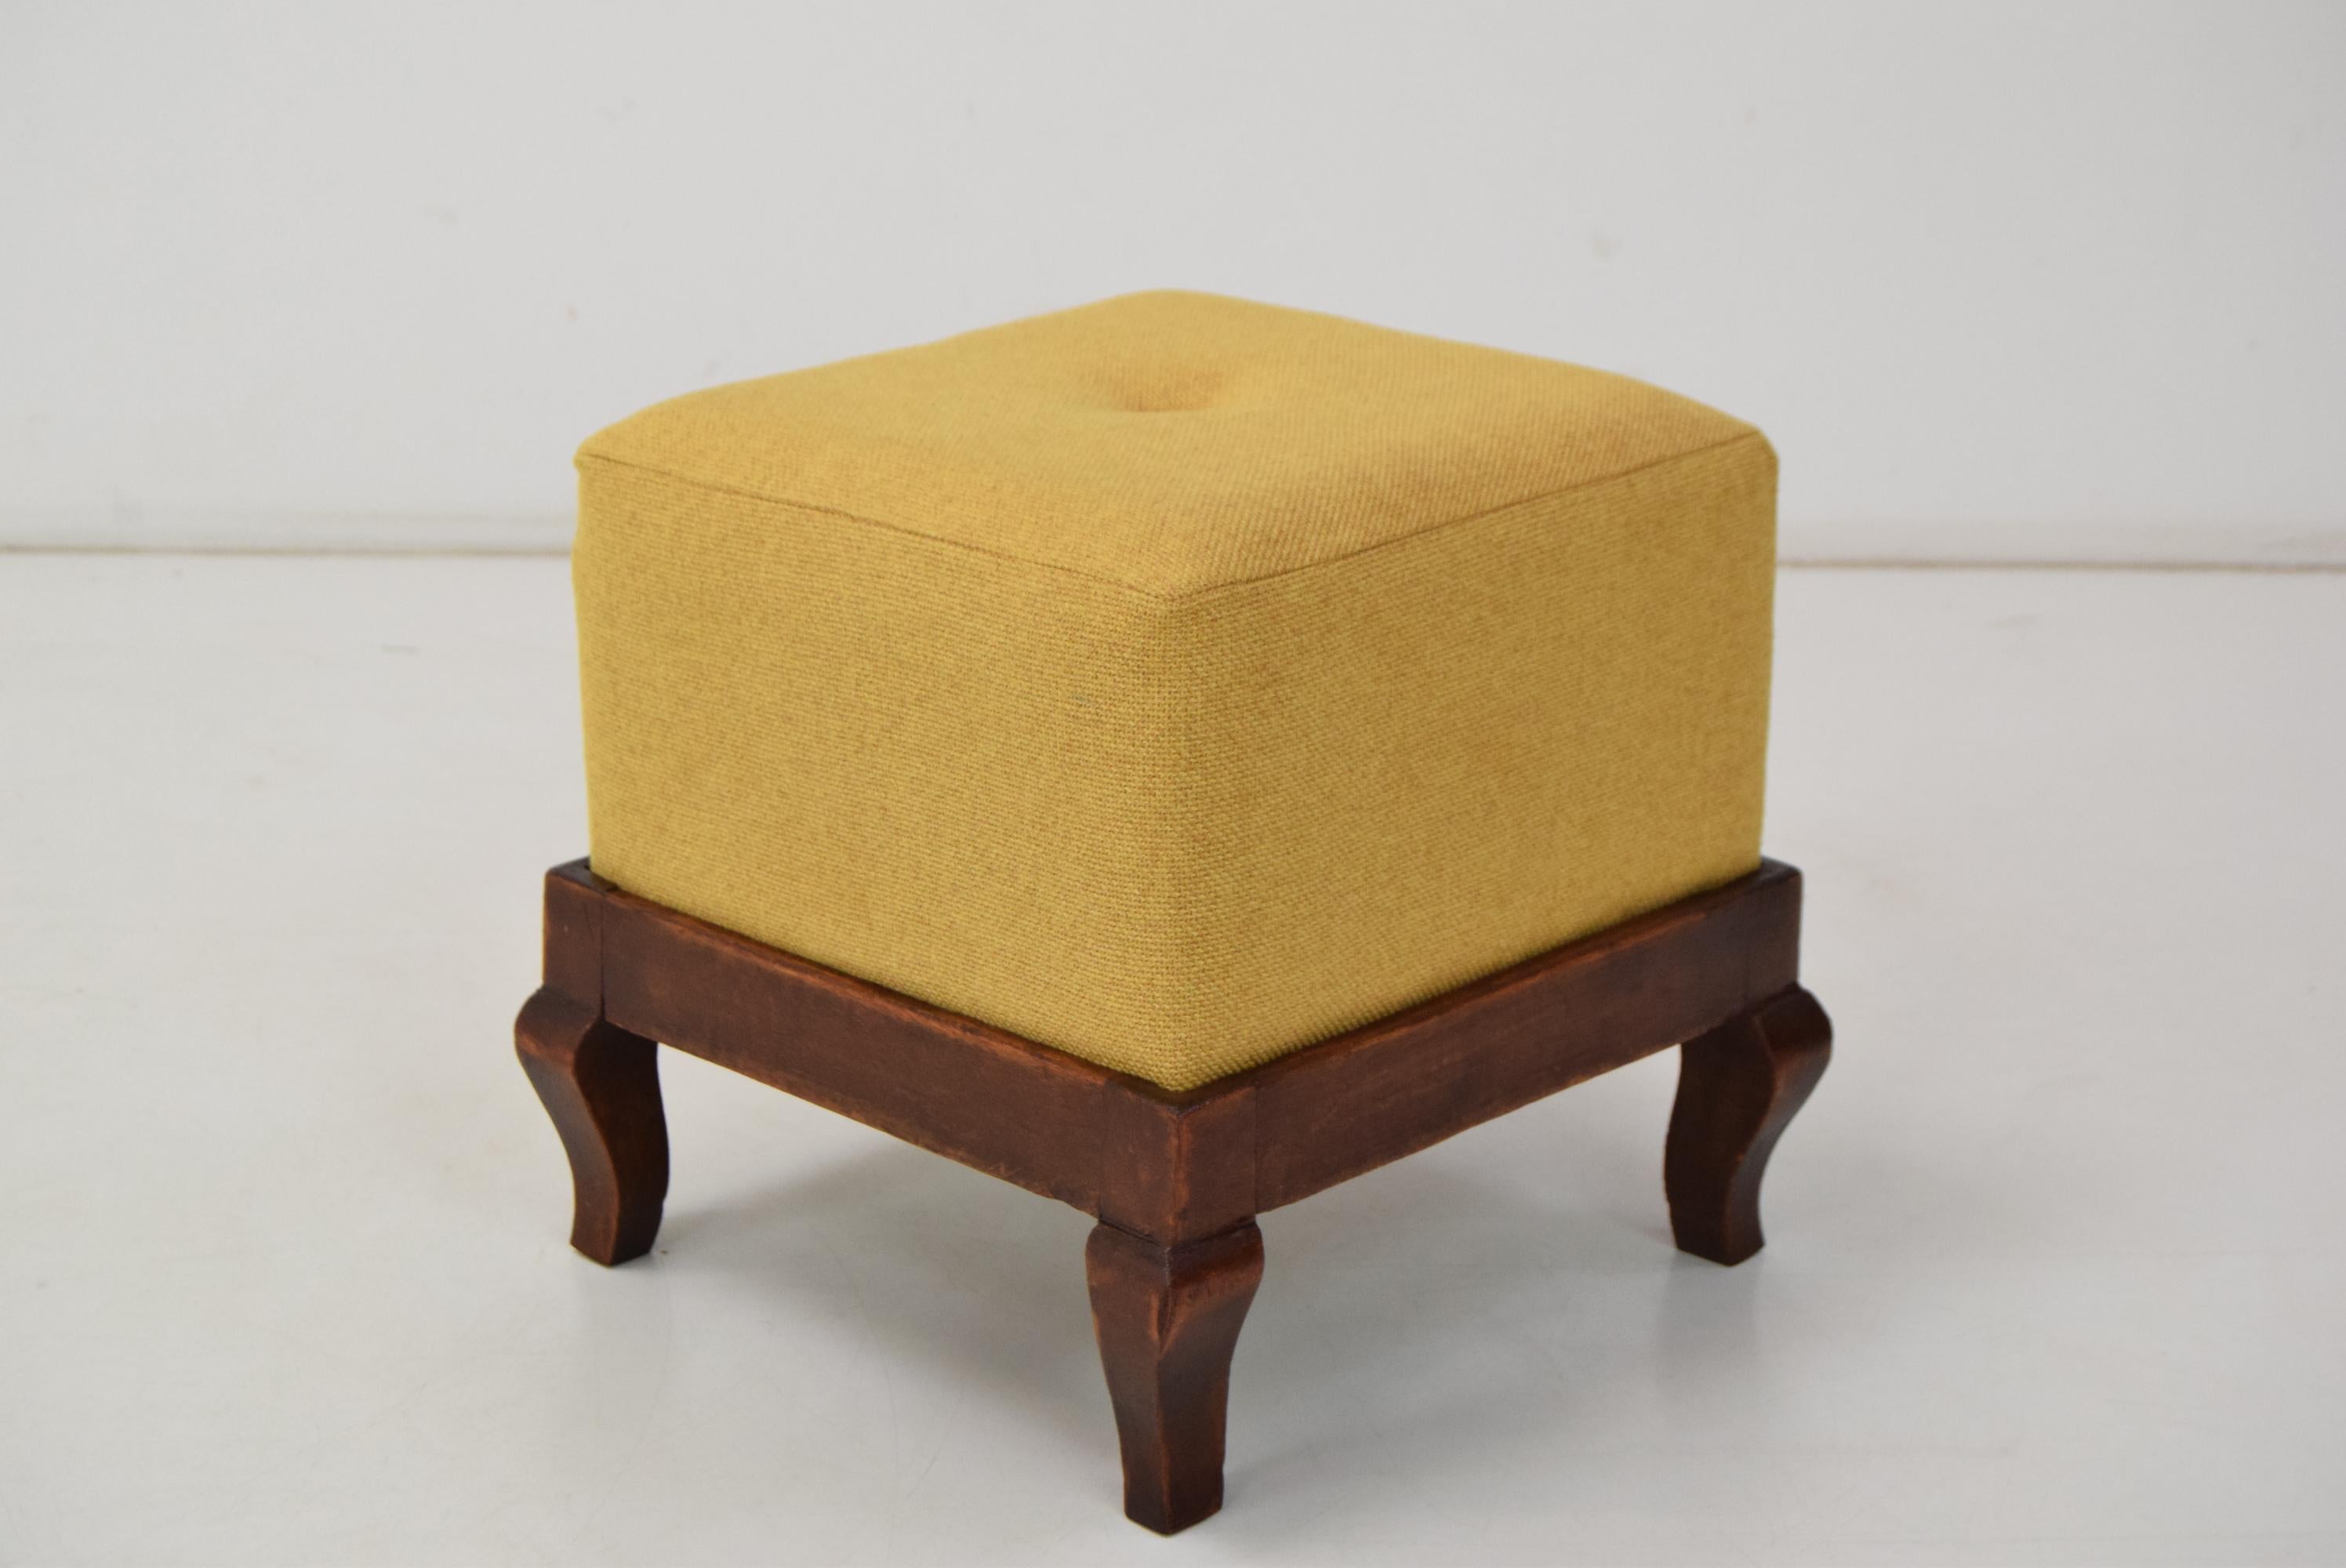 Art Deco Tabouret, footstool, 1930´s
Made in Czechoslovakia
Made of Fabric and Wood
Beautiful yellow Upholstery
New Upholstery
Good Original Condition.